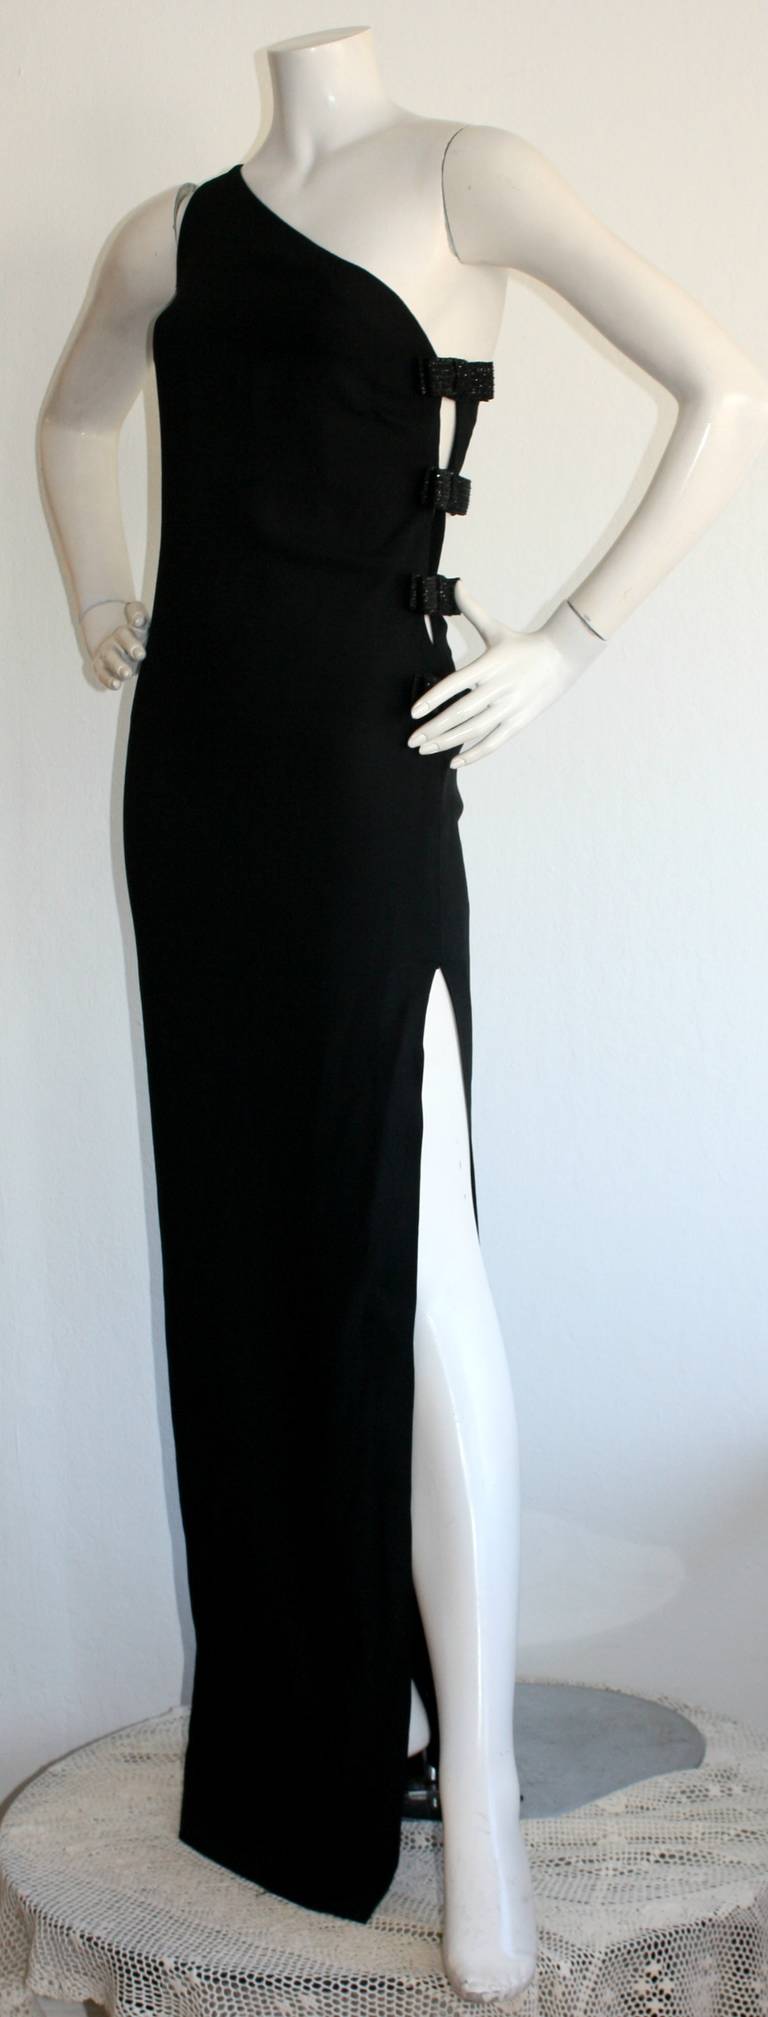 Featuring the sexiest vintage John Galliano for Christian Dior one-shoulder gown! Dramatic slit up the thigh, with crystal encrusted bows securing cut-outs at side of bodice. Fully lined. In great condition. Approximately Size